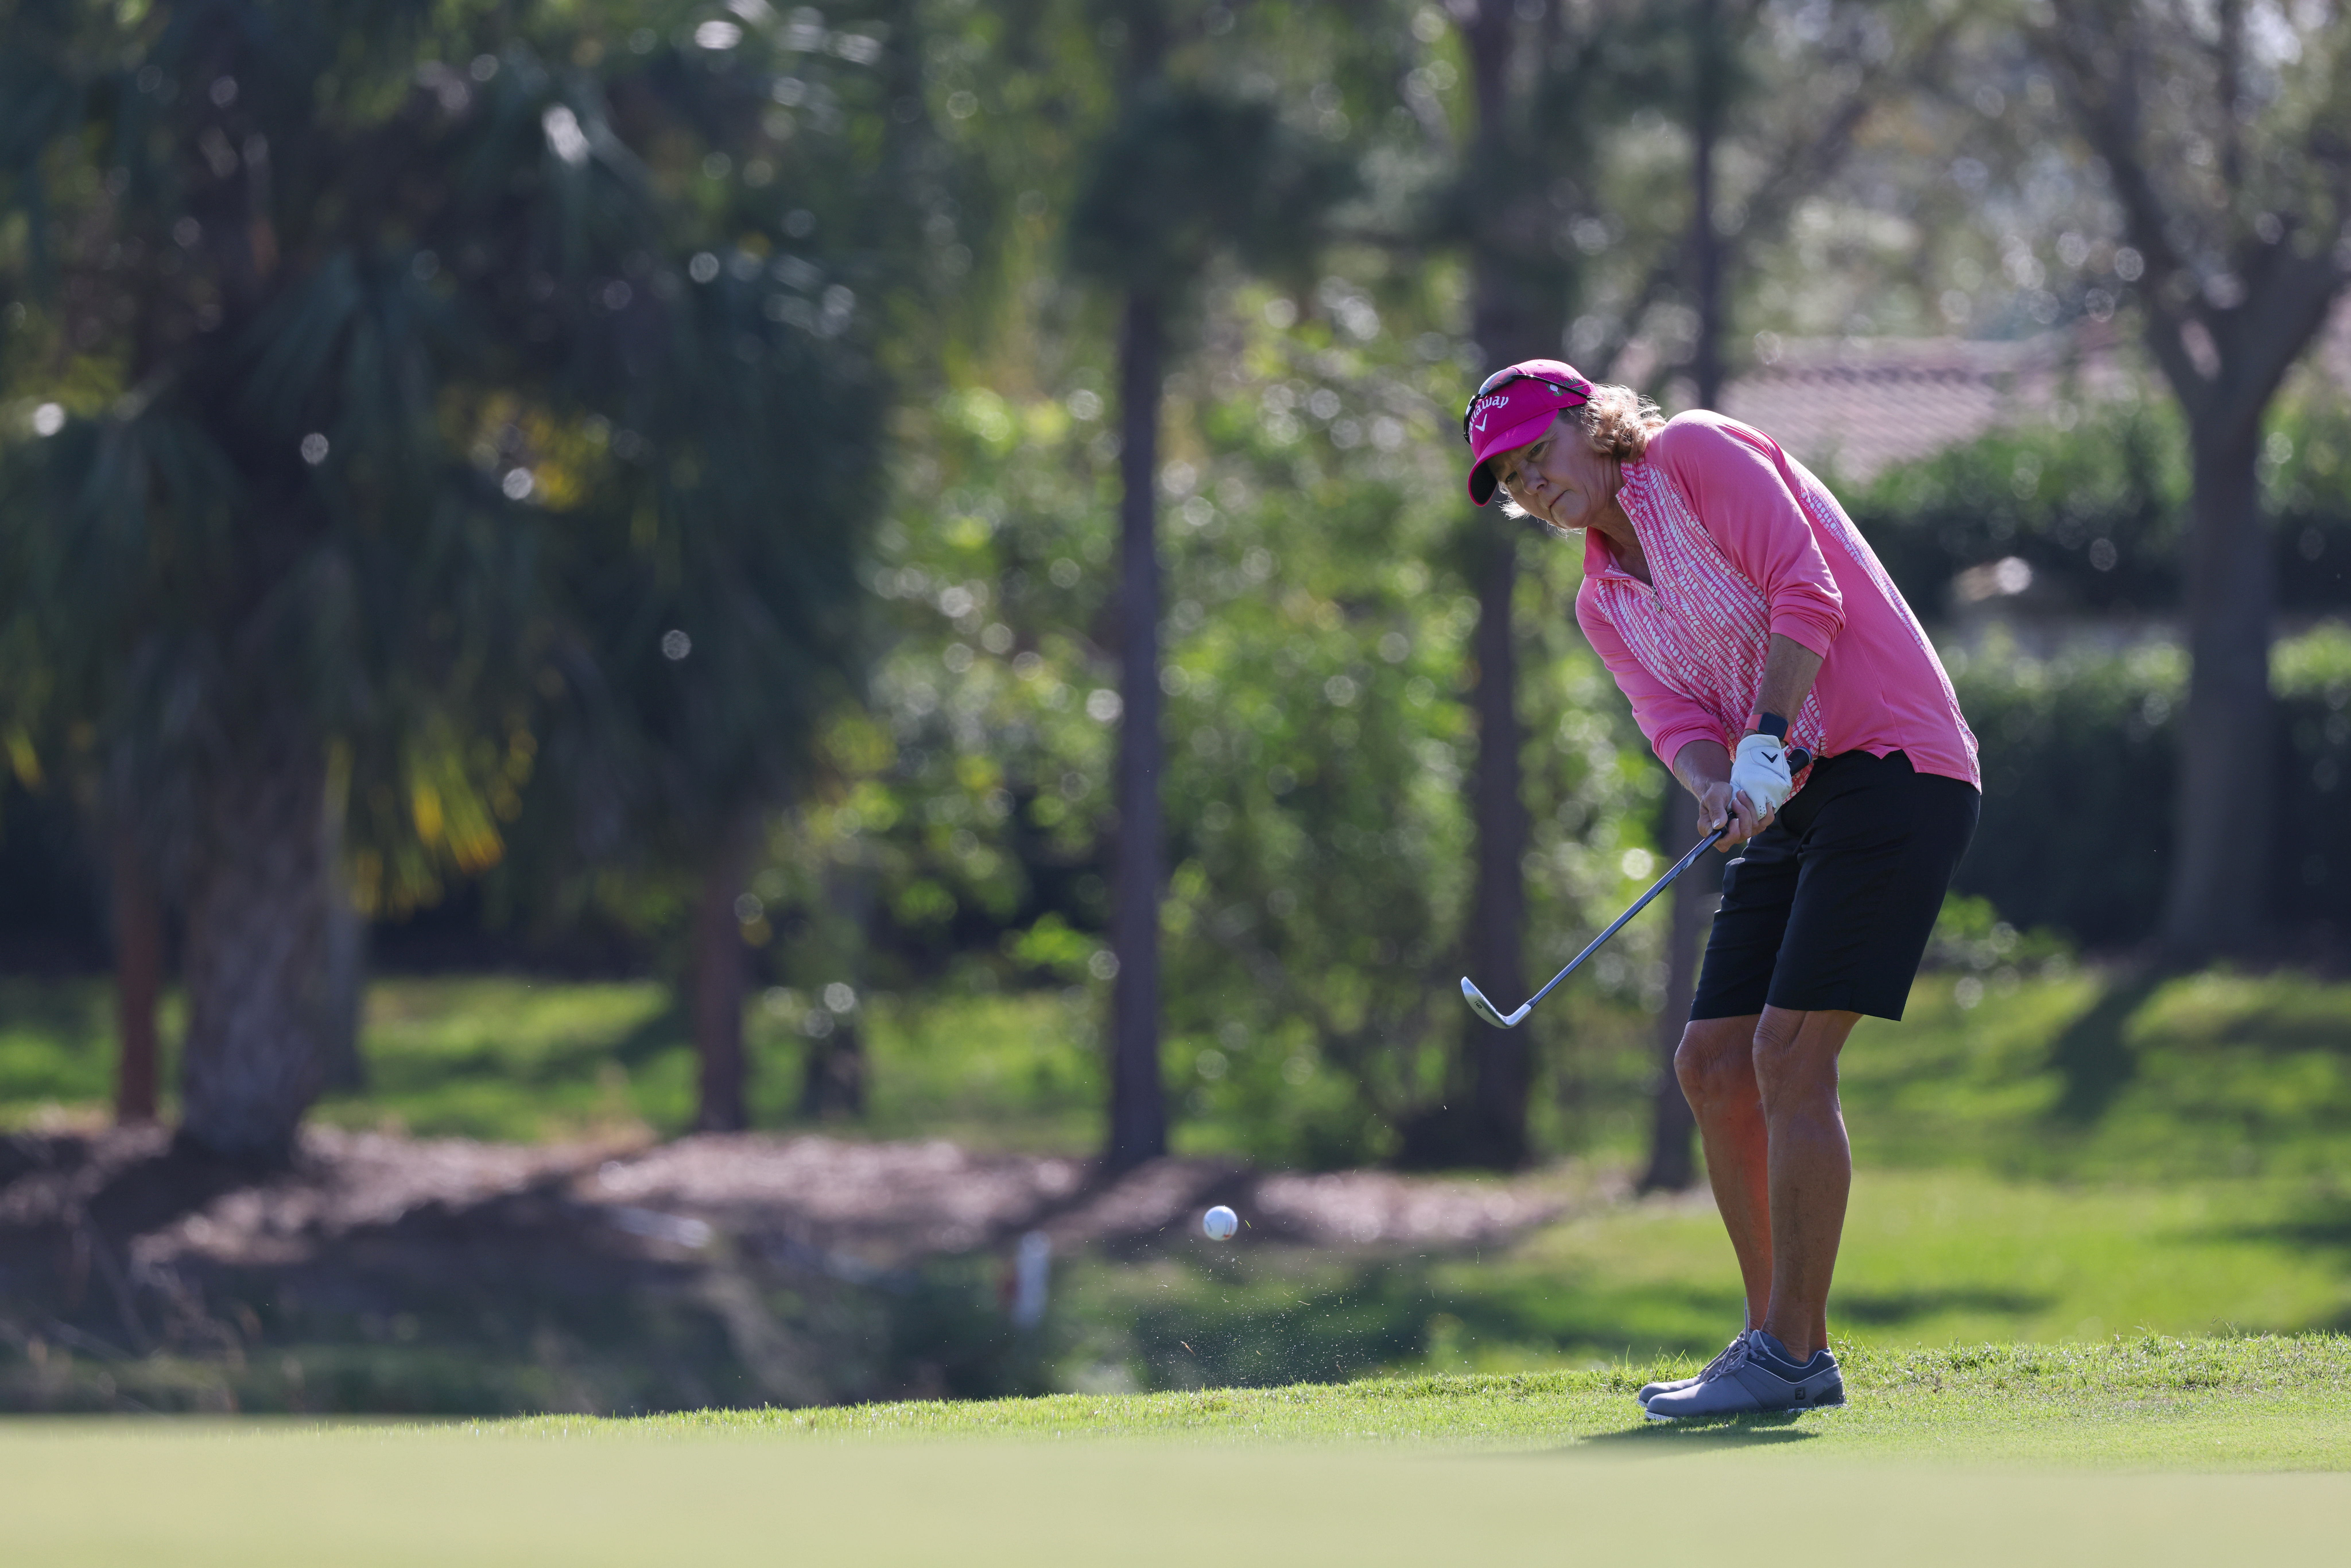 Lisa Grimes chips on to the green of the fourth hole during the final round of the 2023 PGA Women's Stroke Play Championship (Senior Division) at PGA Golf Club in Port St. Lucie, Florida. (Photo by Austen Amacker/PGA of America)